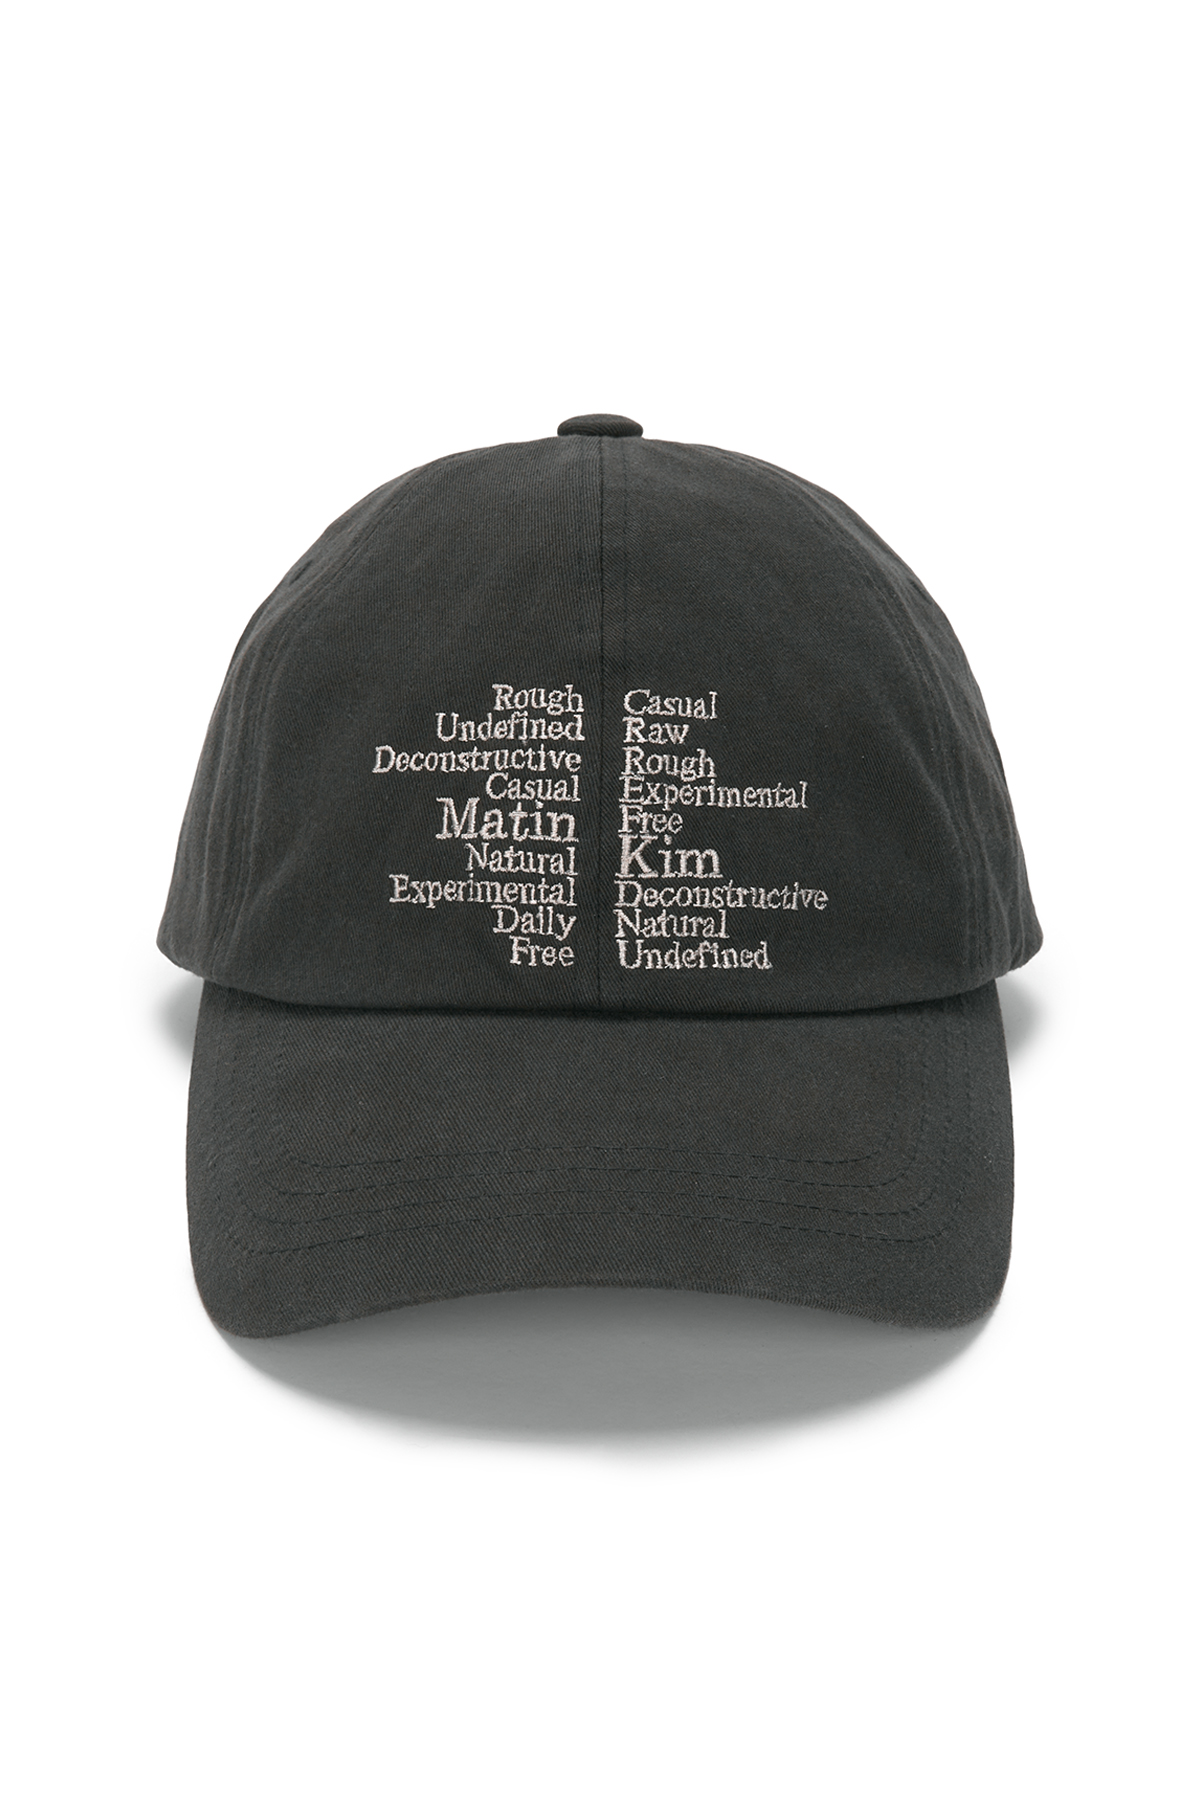 KEYWORD LETTERING BALL CAP IN CHARCOAL